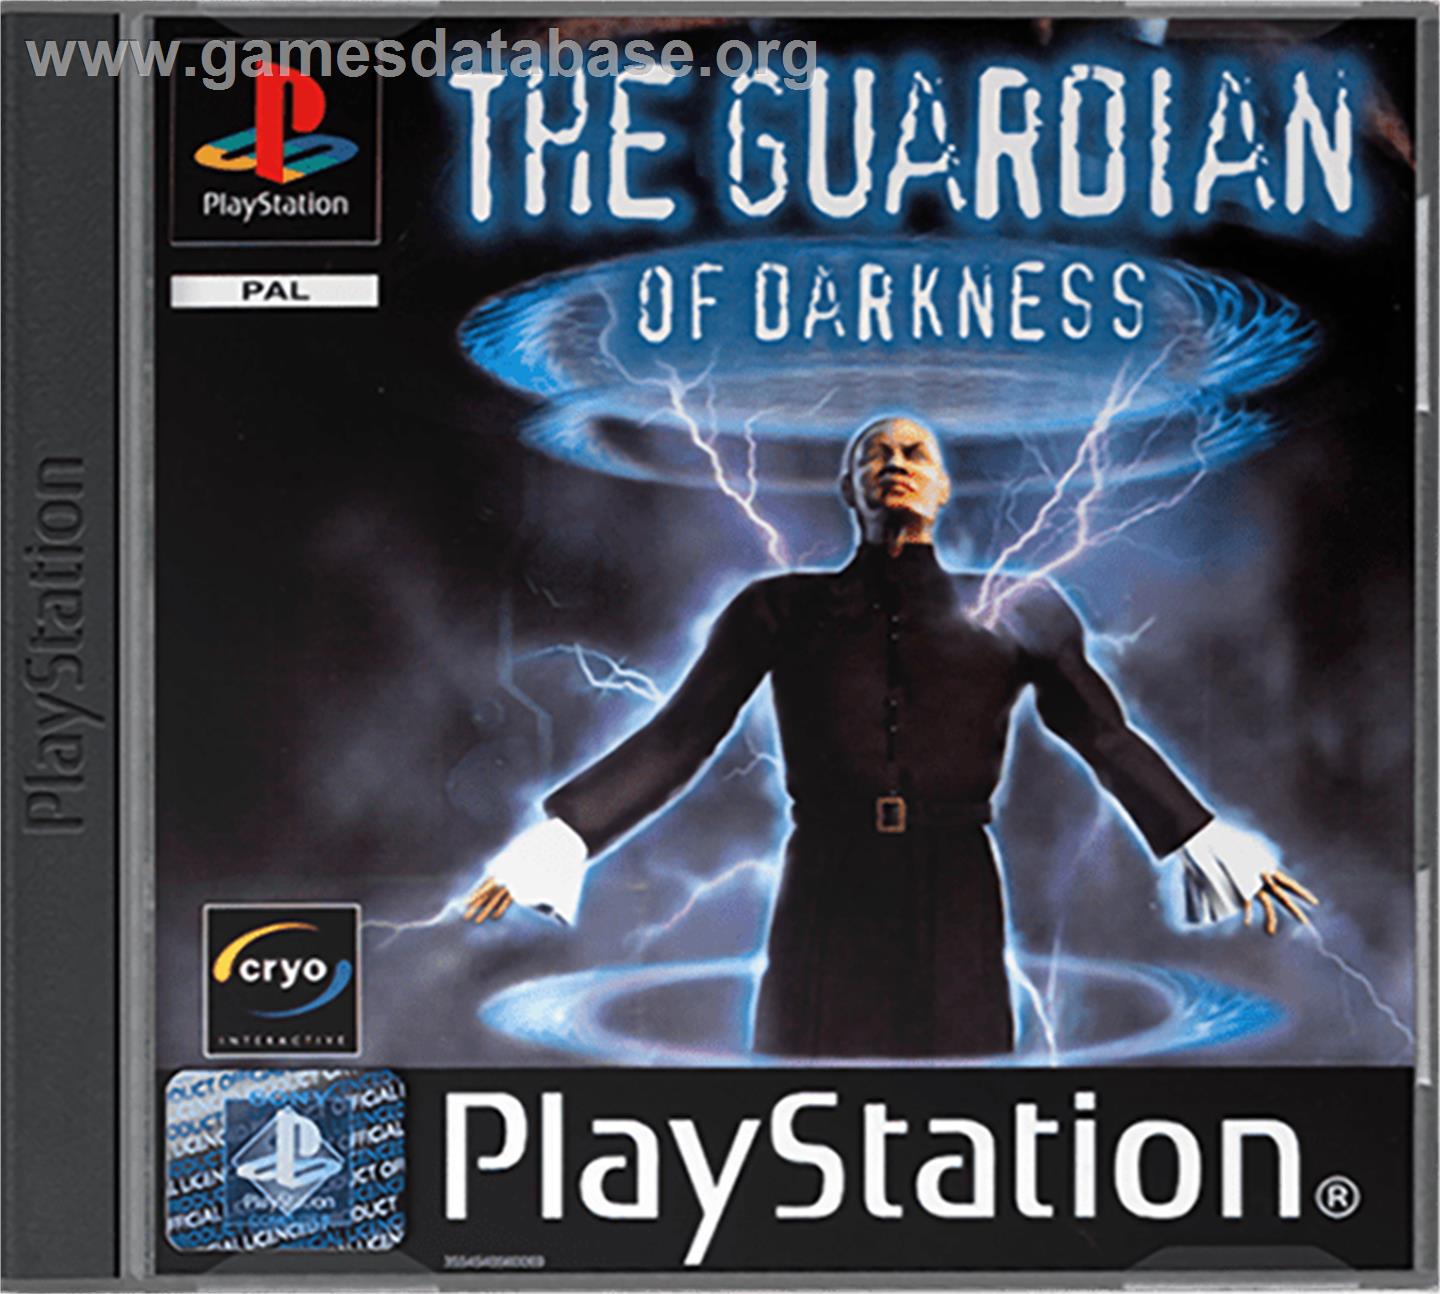 The Guardian of Darkness - Sony Playstation - Artwork - Box